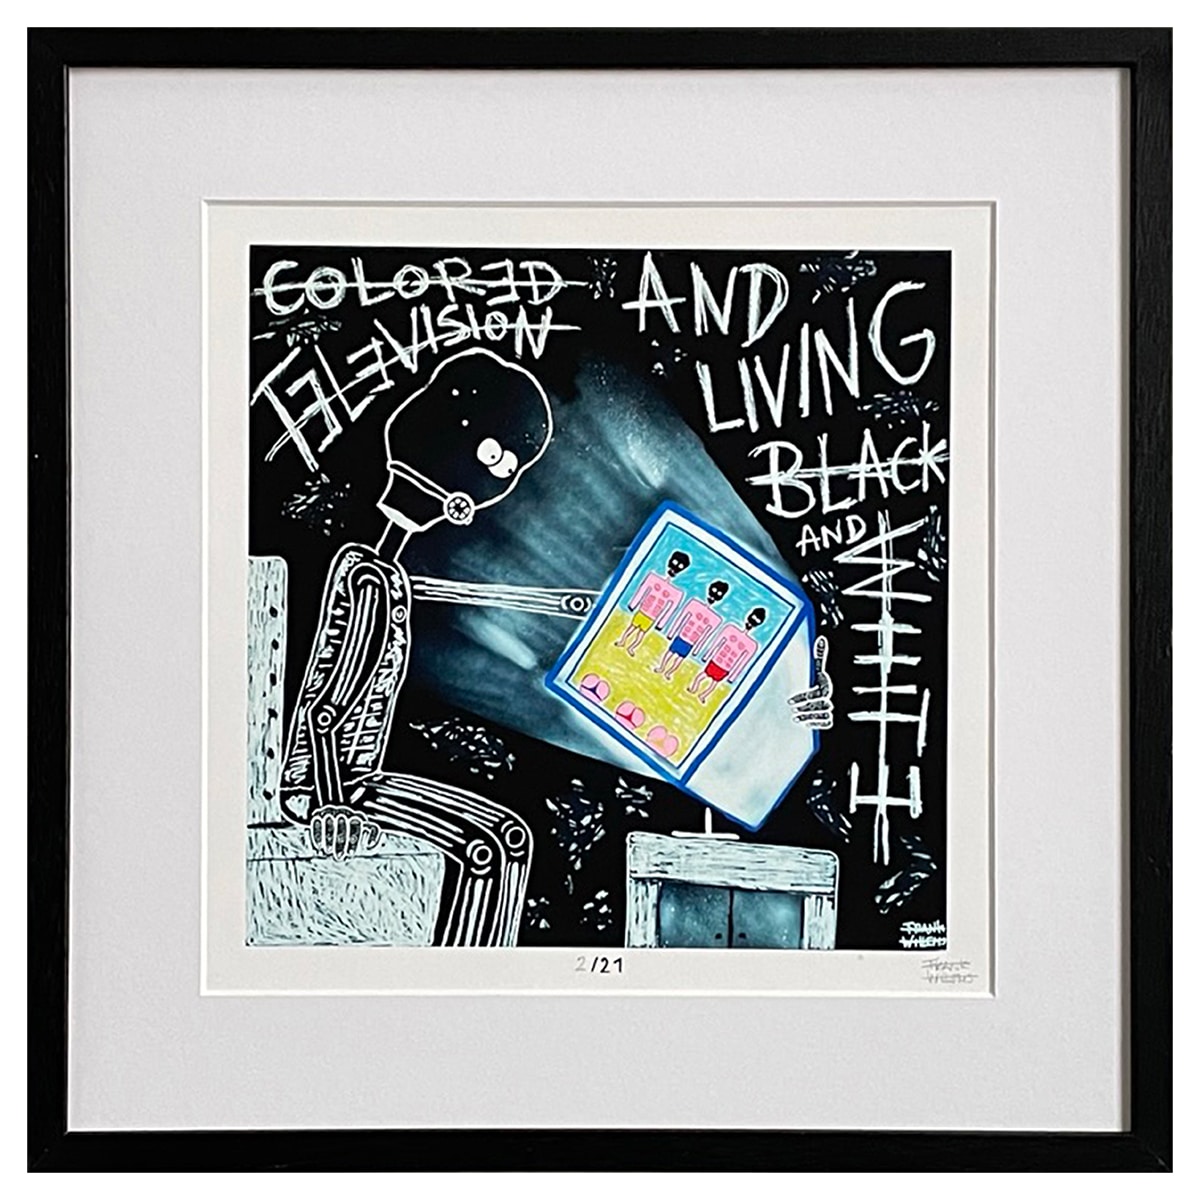 Limited Edt Art Prints - COLORED TELEVISION - Frank Willems